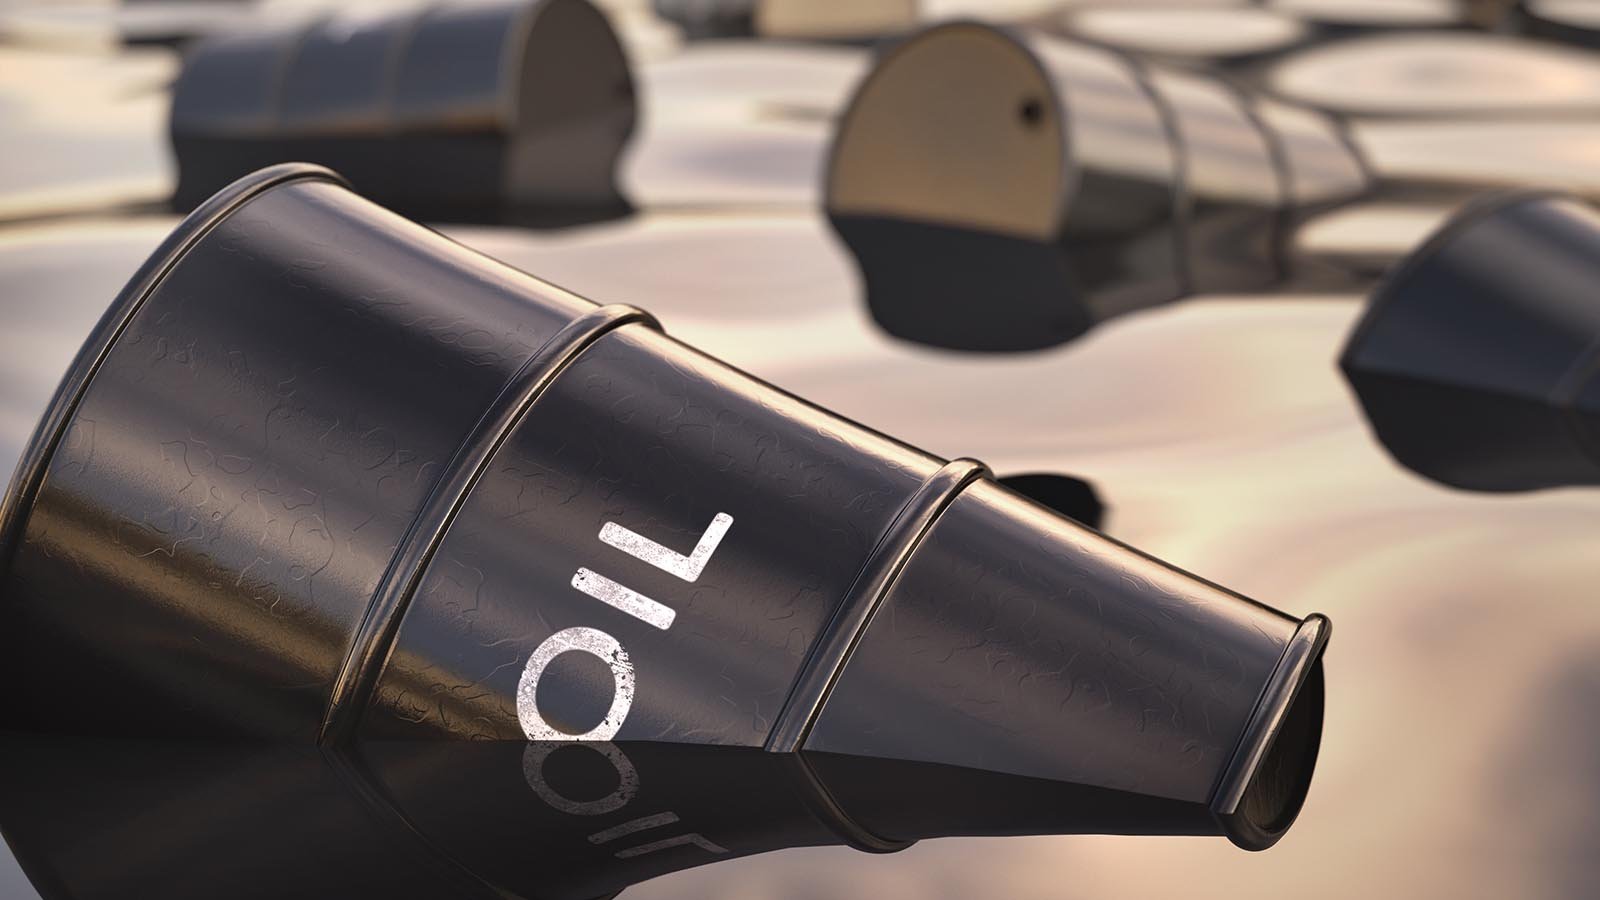 Black oil barrel that reads "oil" on the side in a pool of oil with other barrels